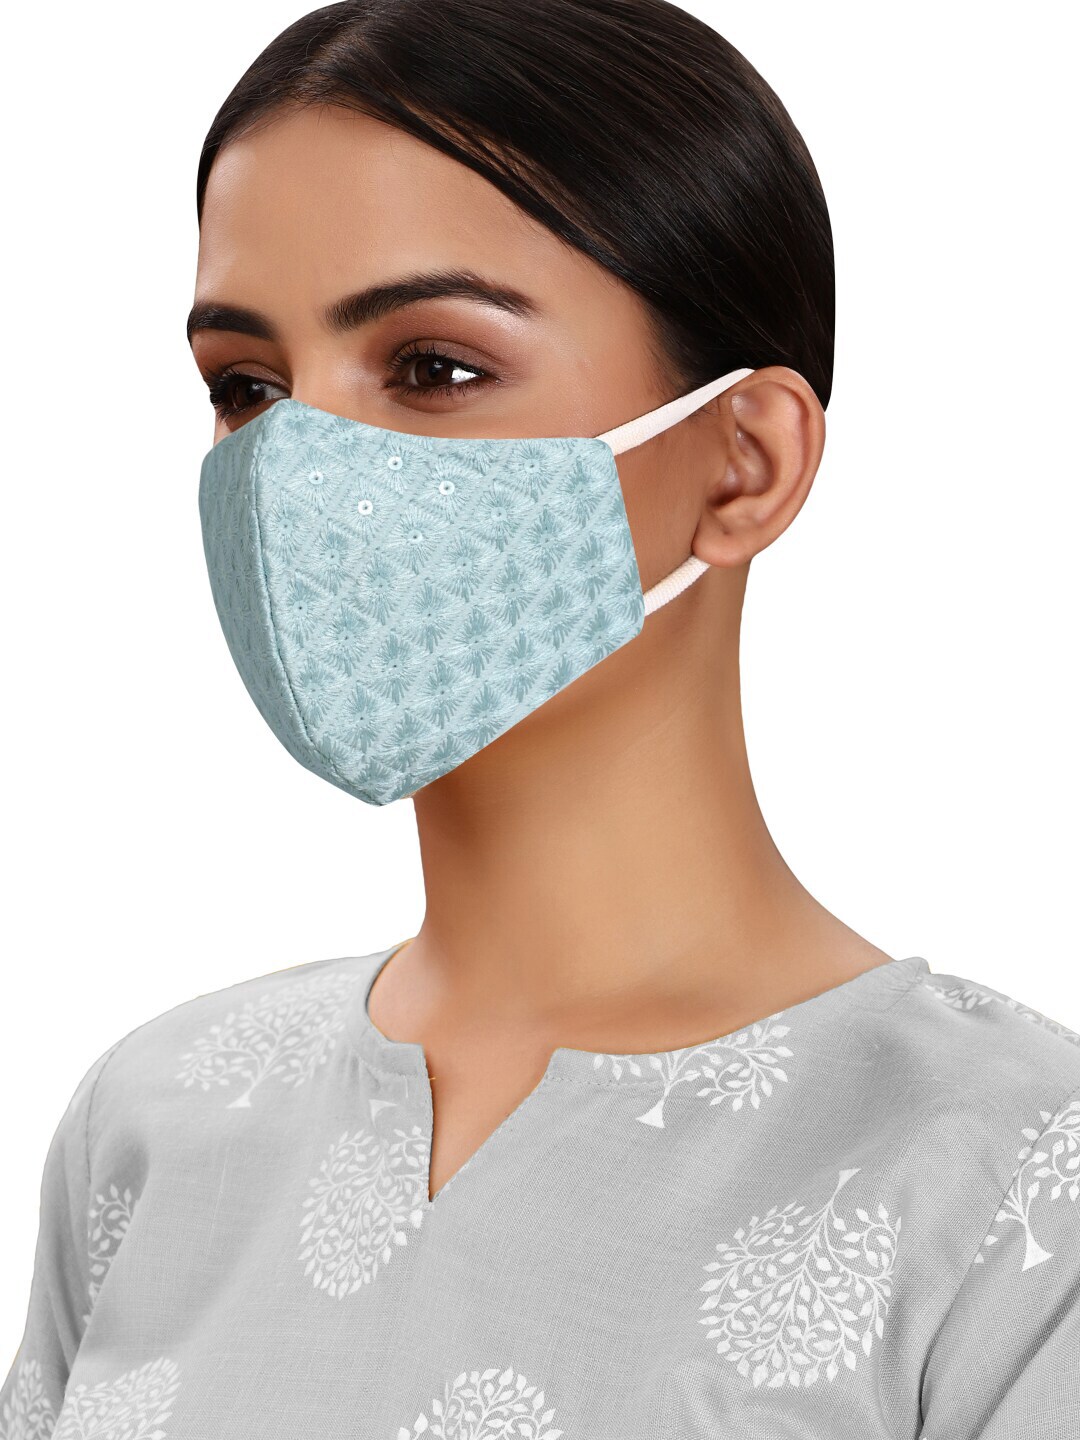 MASQ Blue Embroidered & Sequinned 4-Ply Reusable Anti-Pollution Cloth Mask Price in India